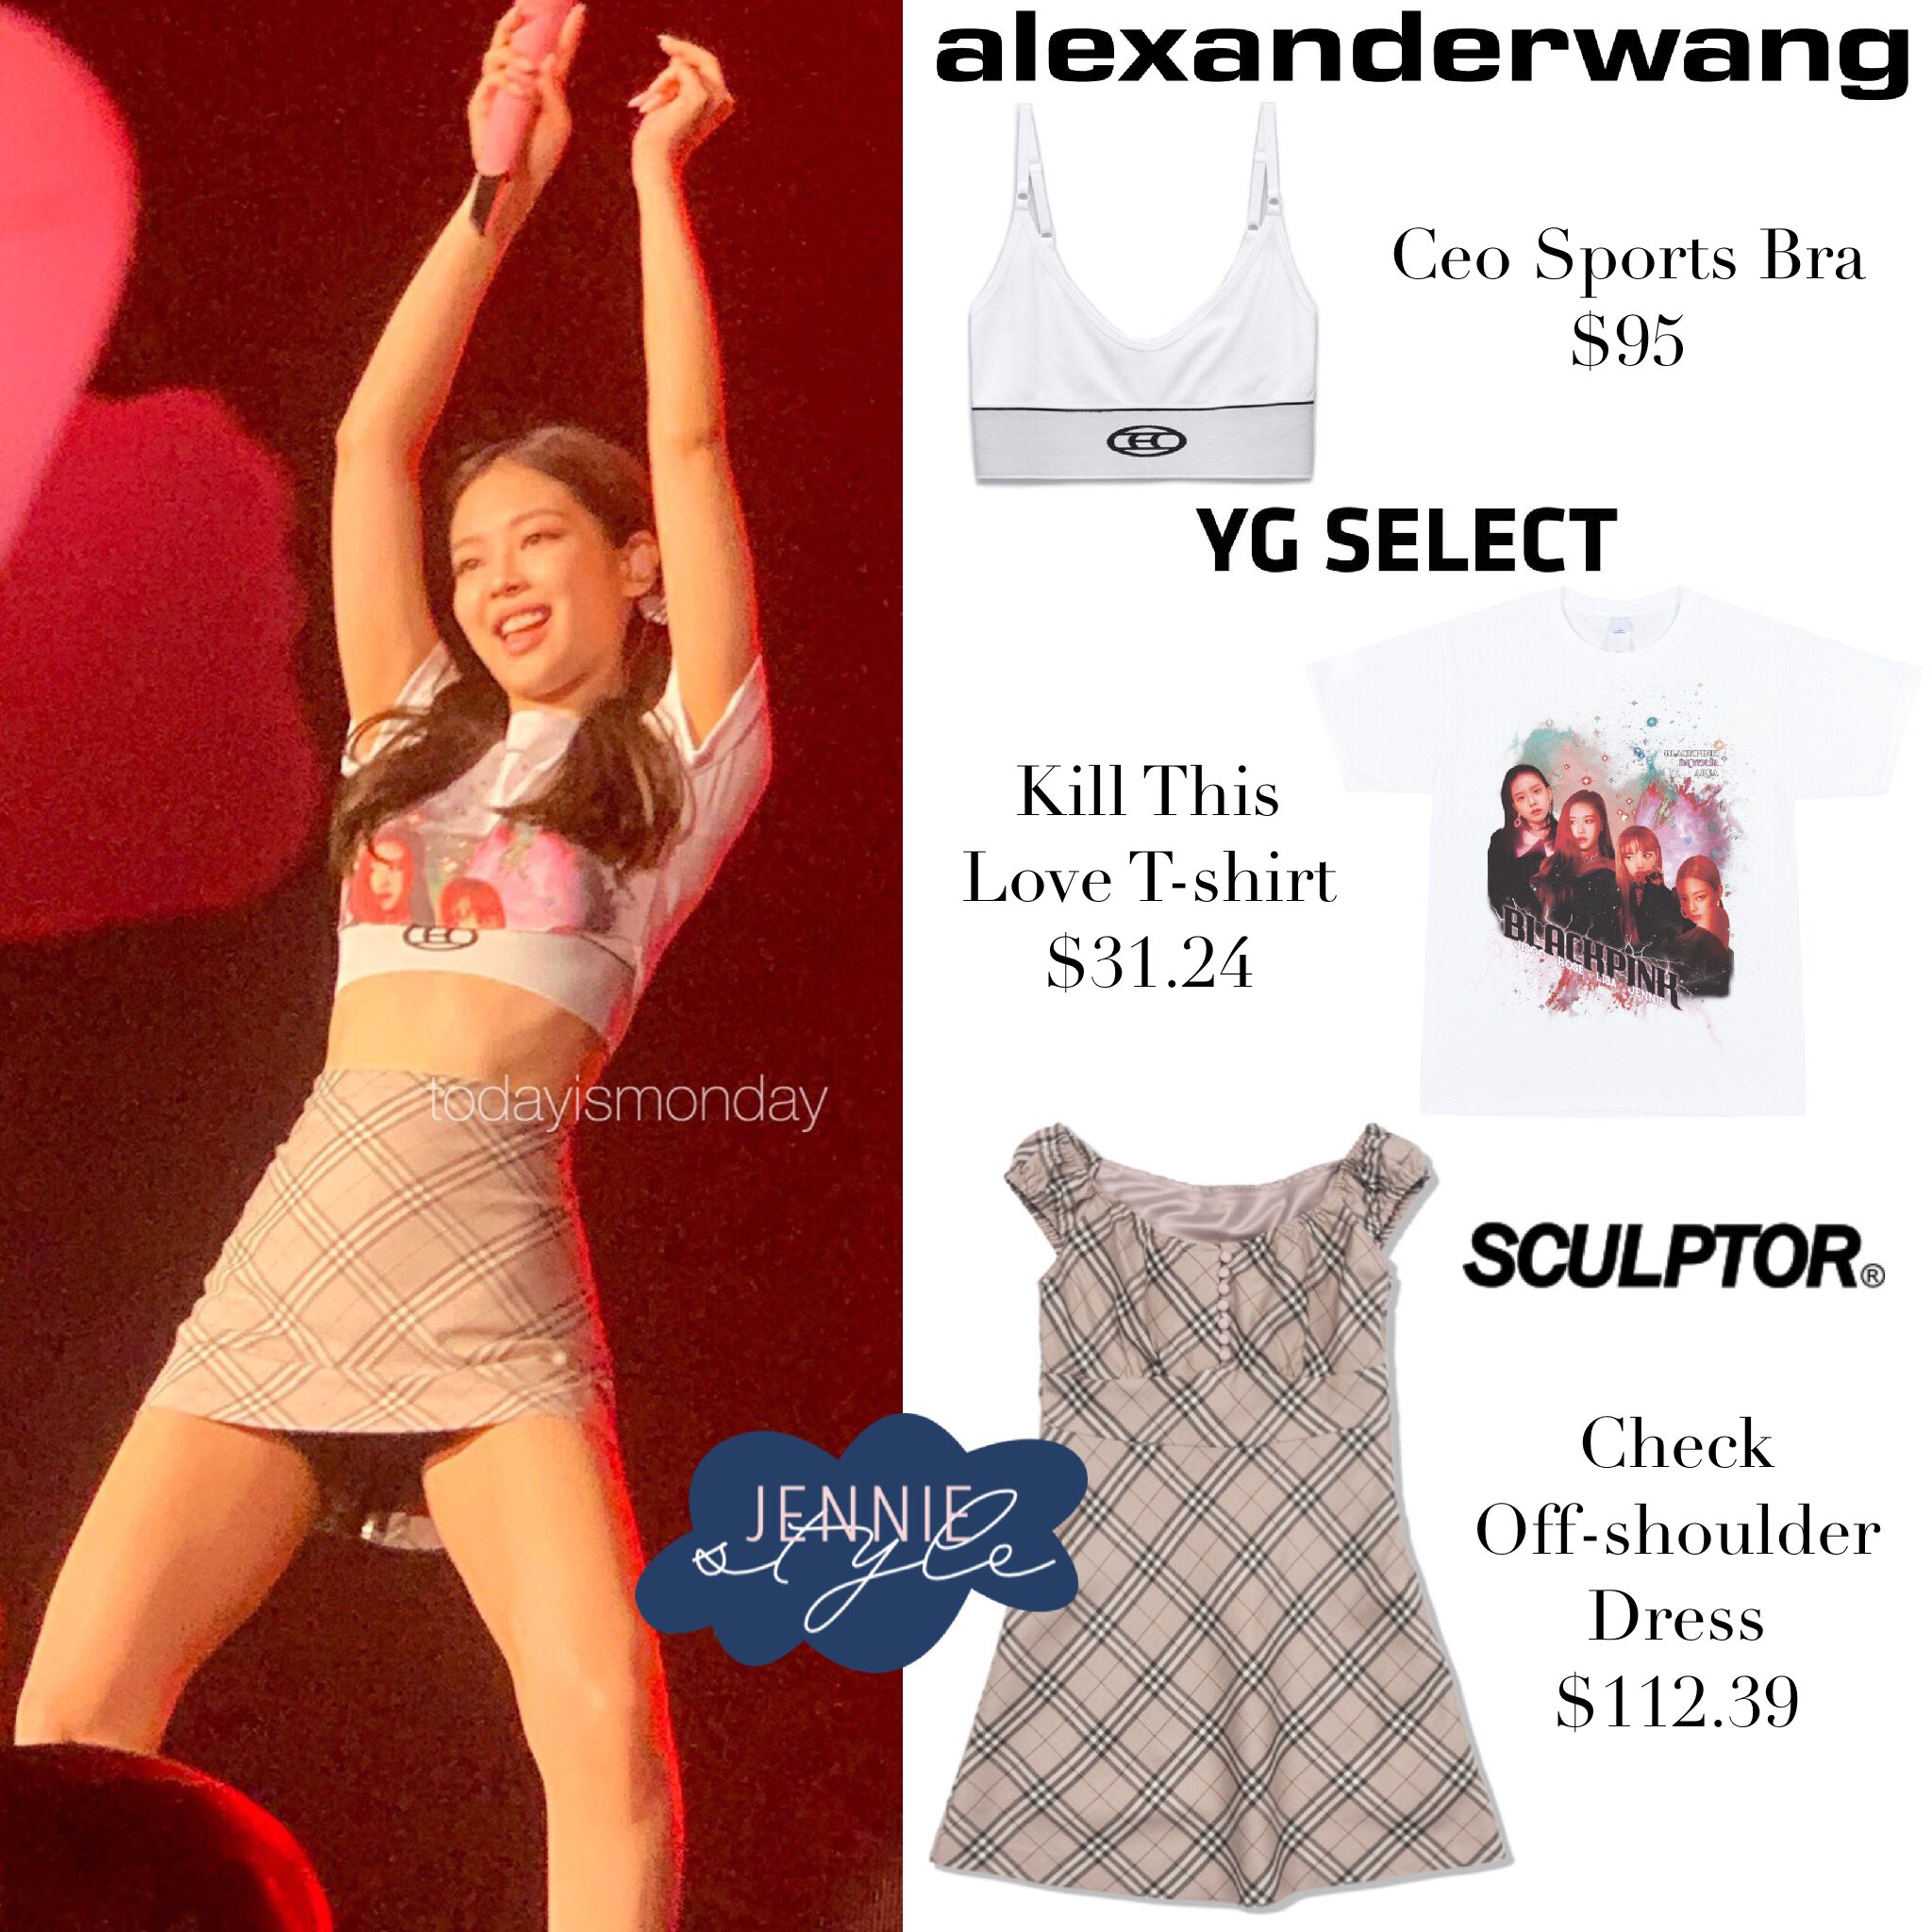 Jennie Style on X: In Your Area in Bangkok D-3 190714 Alexander Wang Ceo  Sports Bra $95, Kill This Love T-shirt $31.24, Sculptor Check Off-shoulder  Dress $112.39 #BLACKPINKInBangkokEncoreDay3 #BLACKPINKinBANGKOK #jennie  #blackpink⁠ #blackpinkfashion #